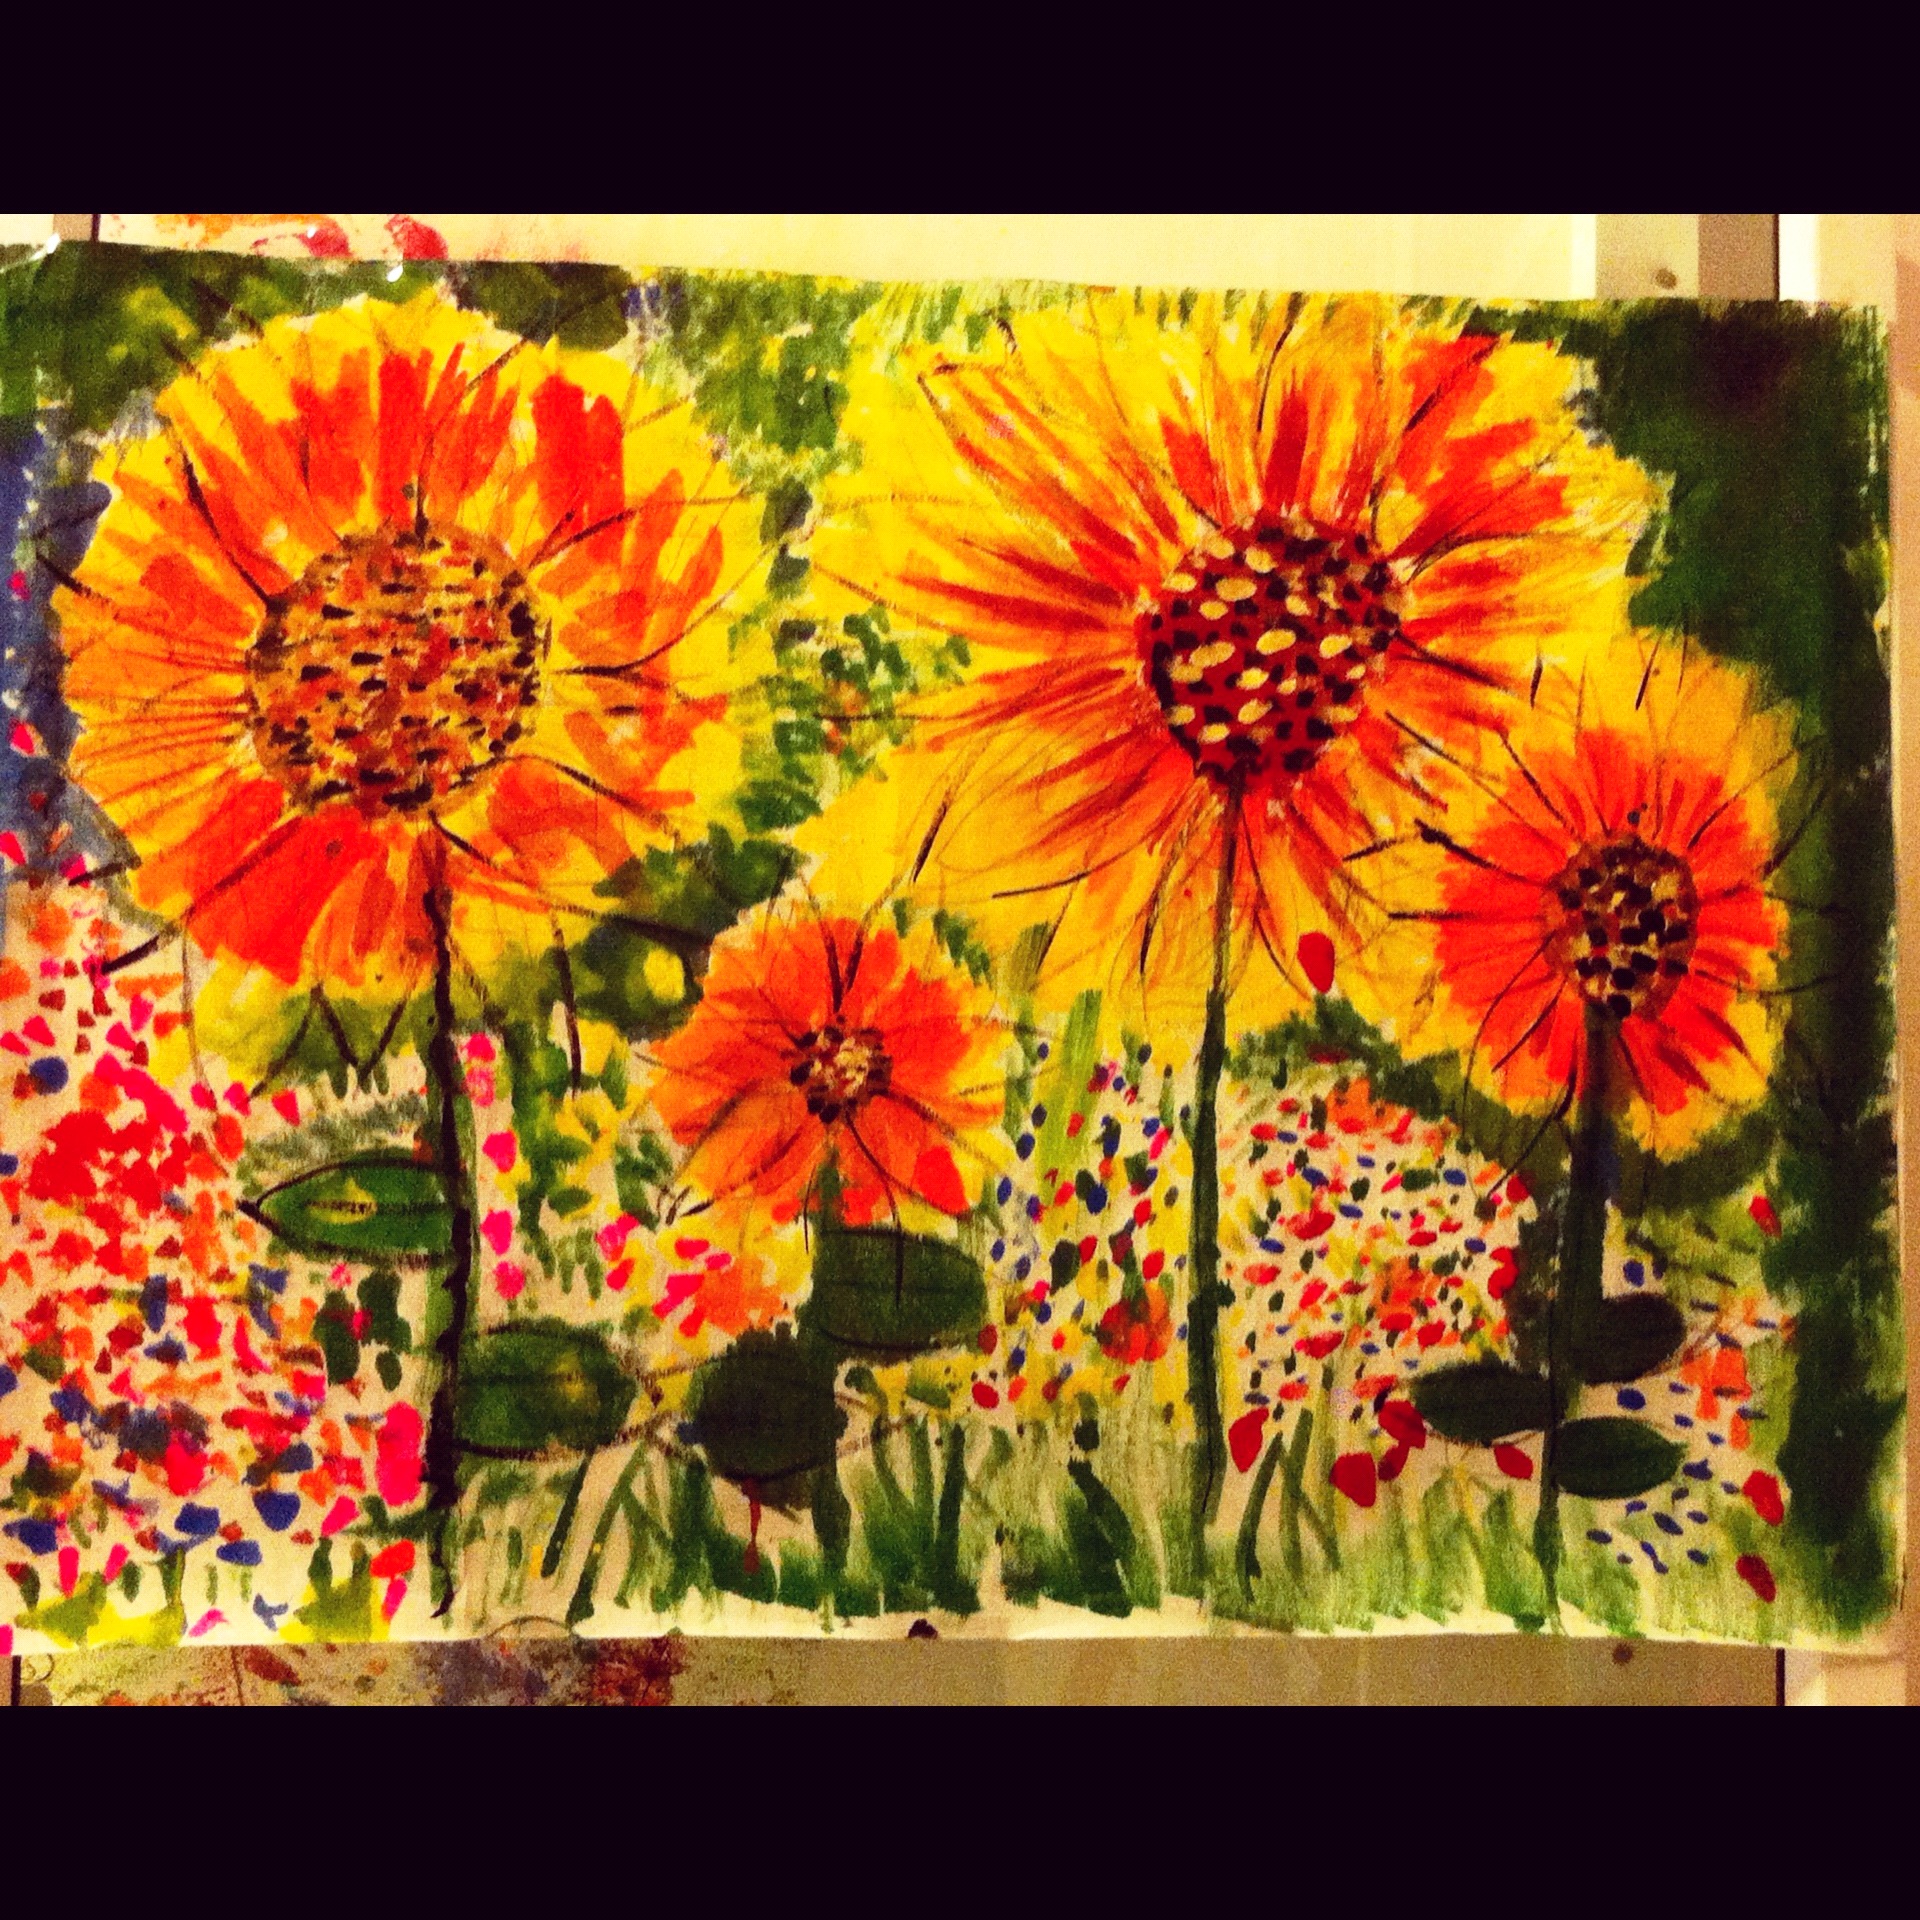 Sunflowers - Oil painting on canvas